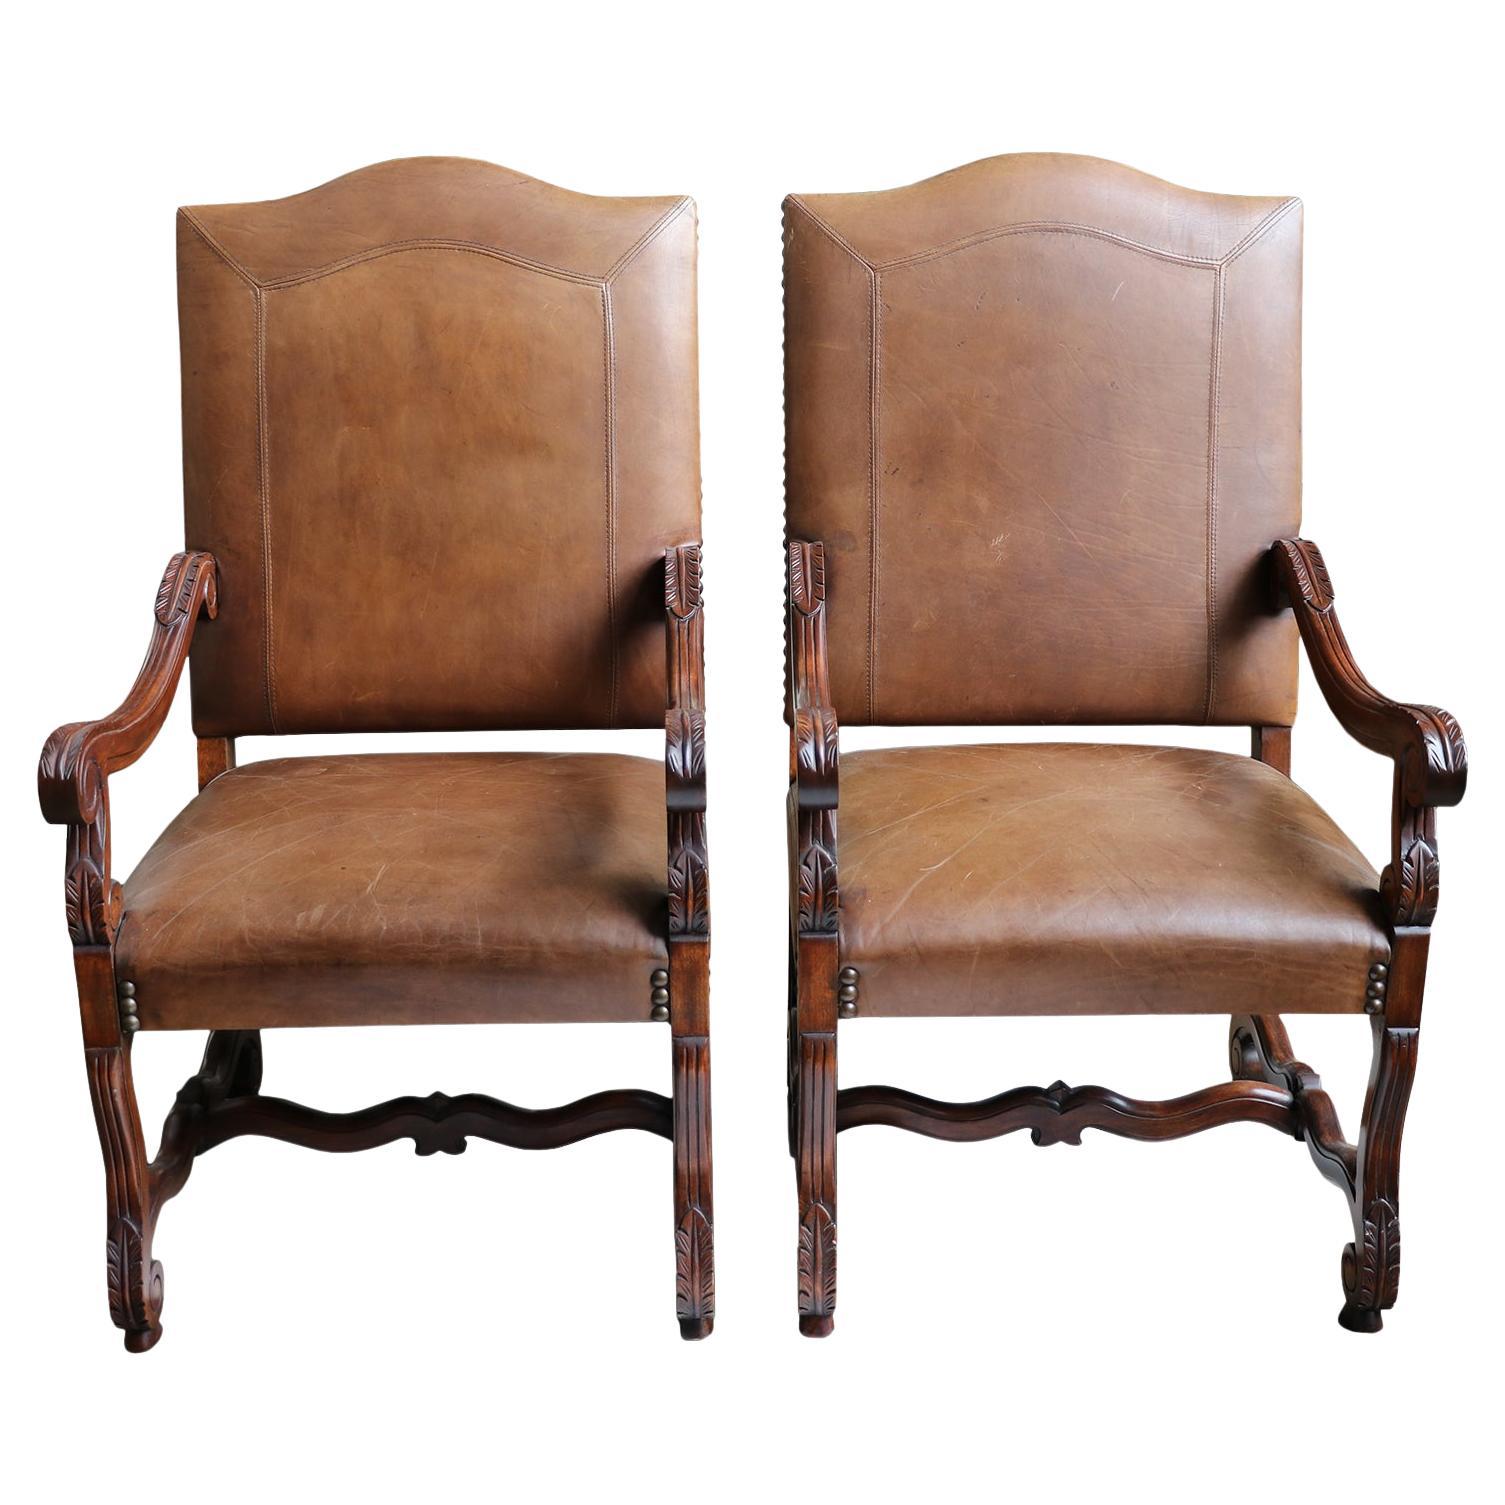 Leather Arm Chairs With Nail Head and Carving Details - a Pair For Sale